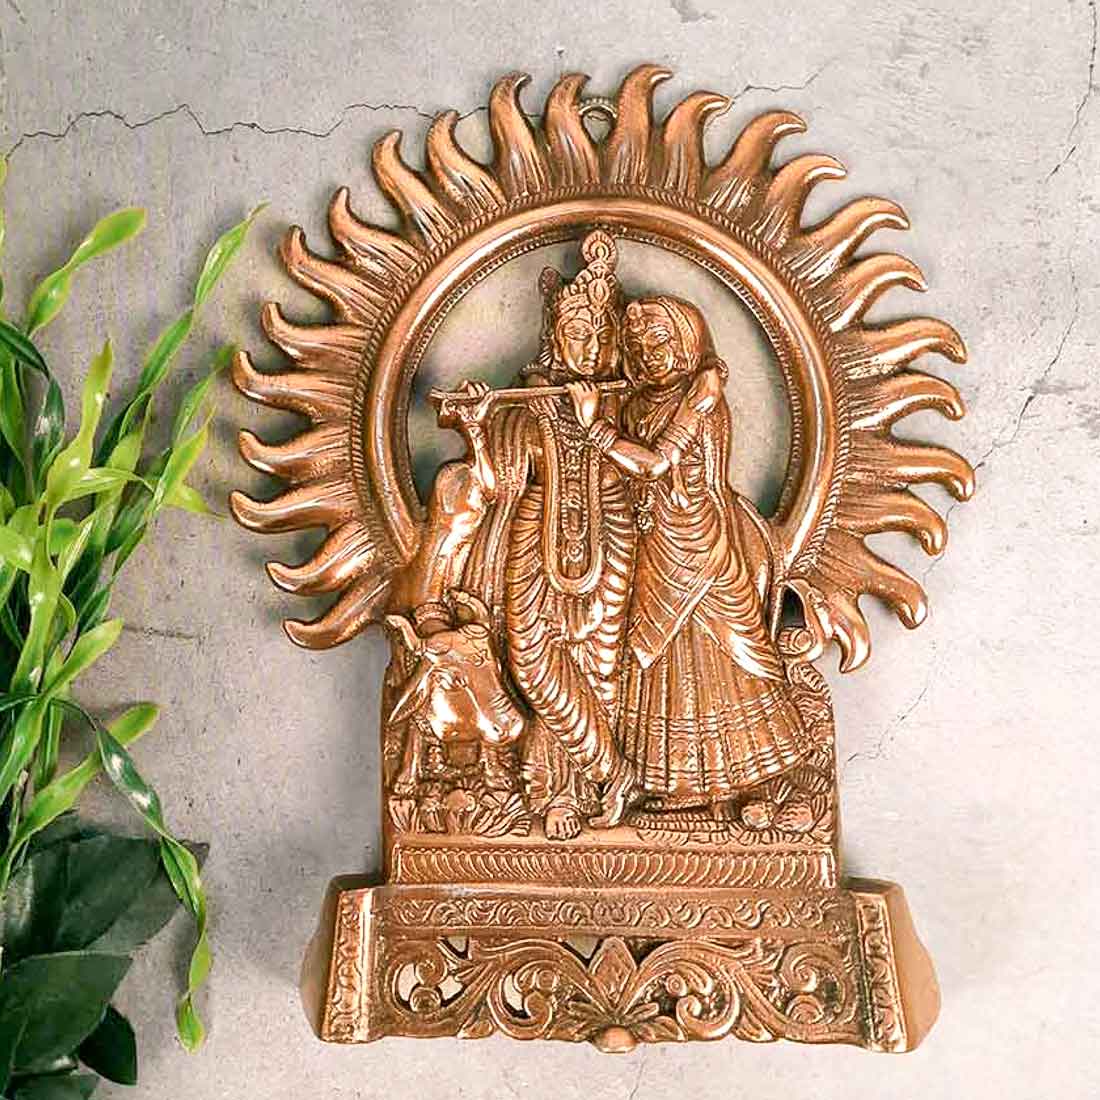 Radha Krishna Wall Hanging Idol | Shri Radha Krishna Playing Flute With Cow Wall Hanging Art Statue Murti | Religious & Spiritual Sculpture - for Gift, Home, Living Room, Office, Puja Room Decoration  - 11 Inch